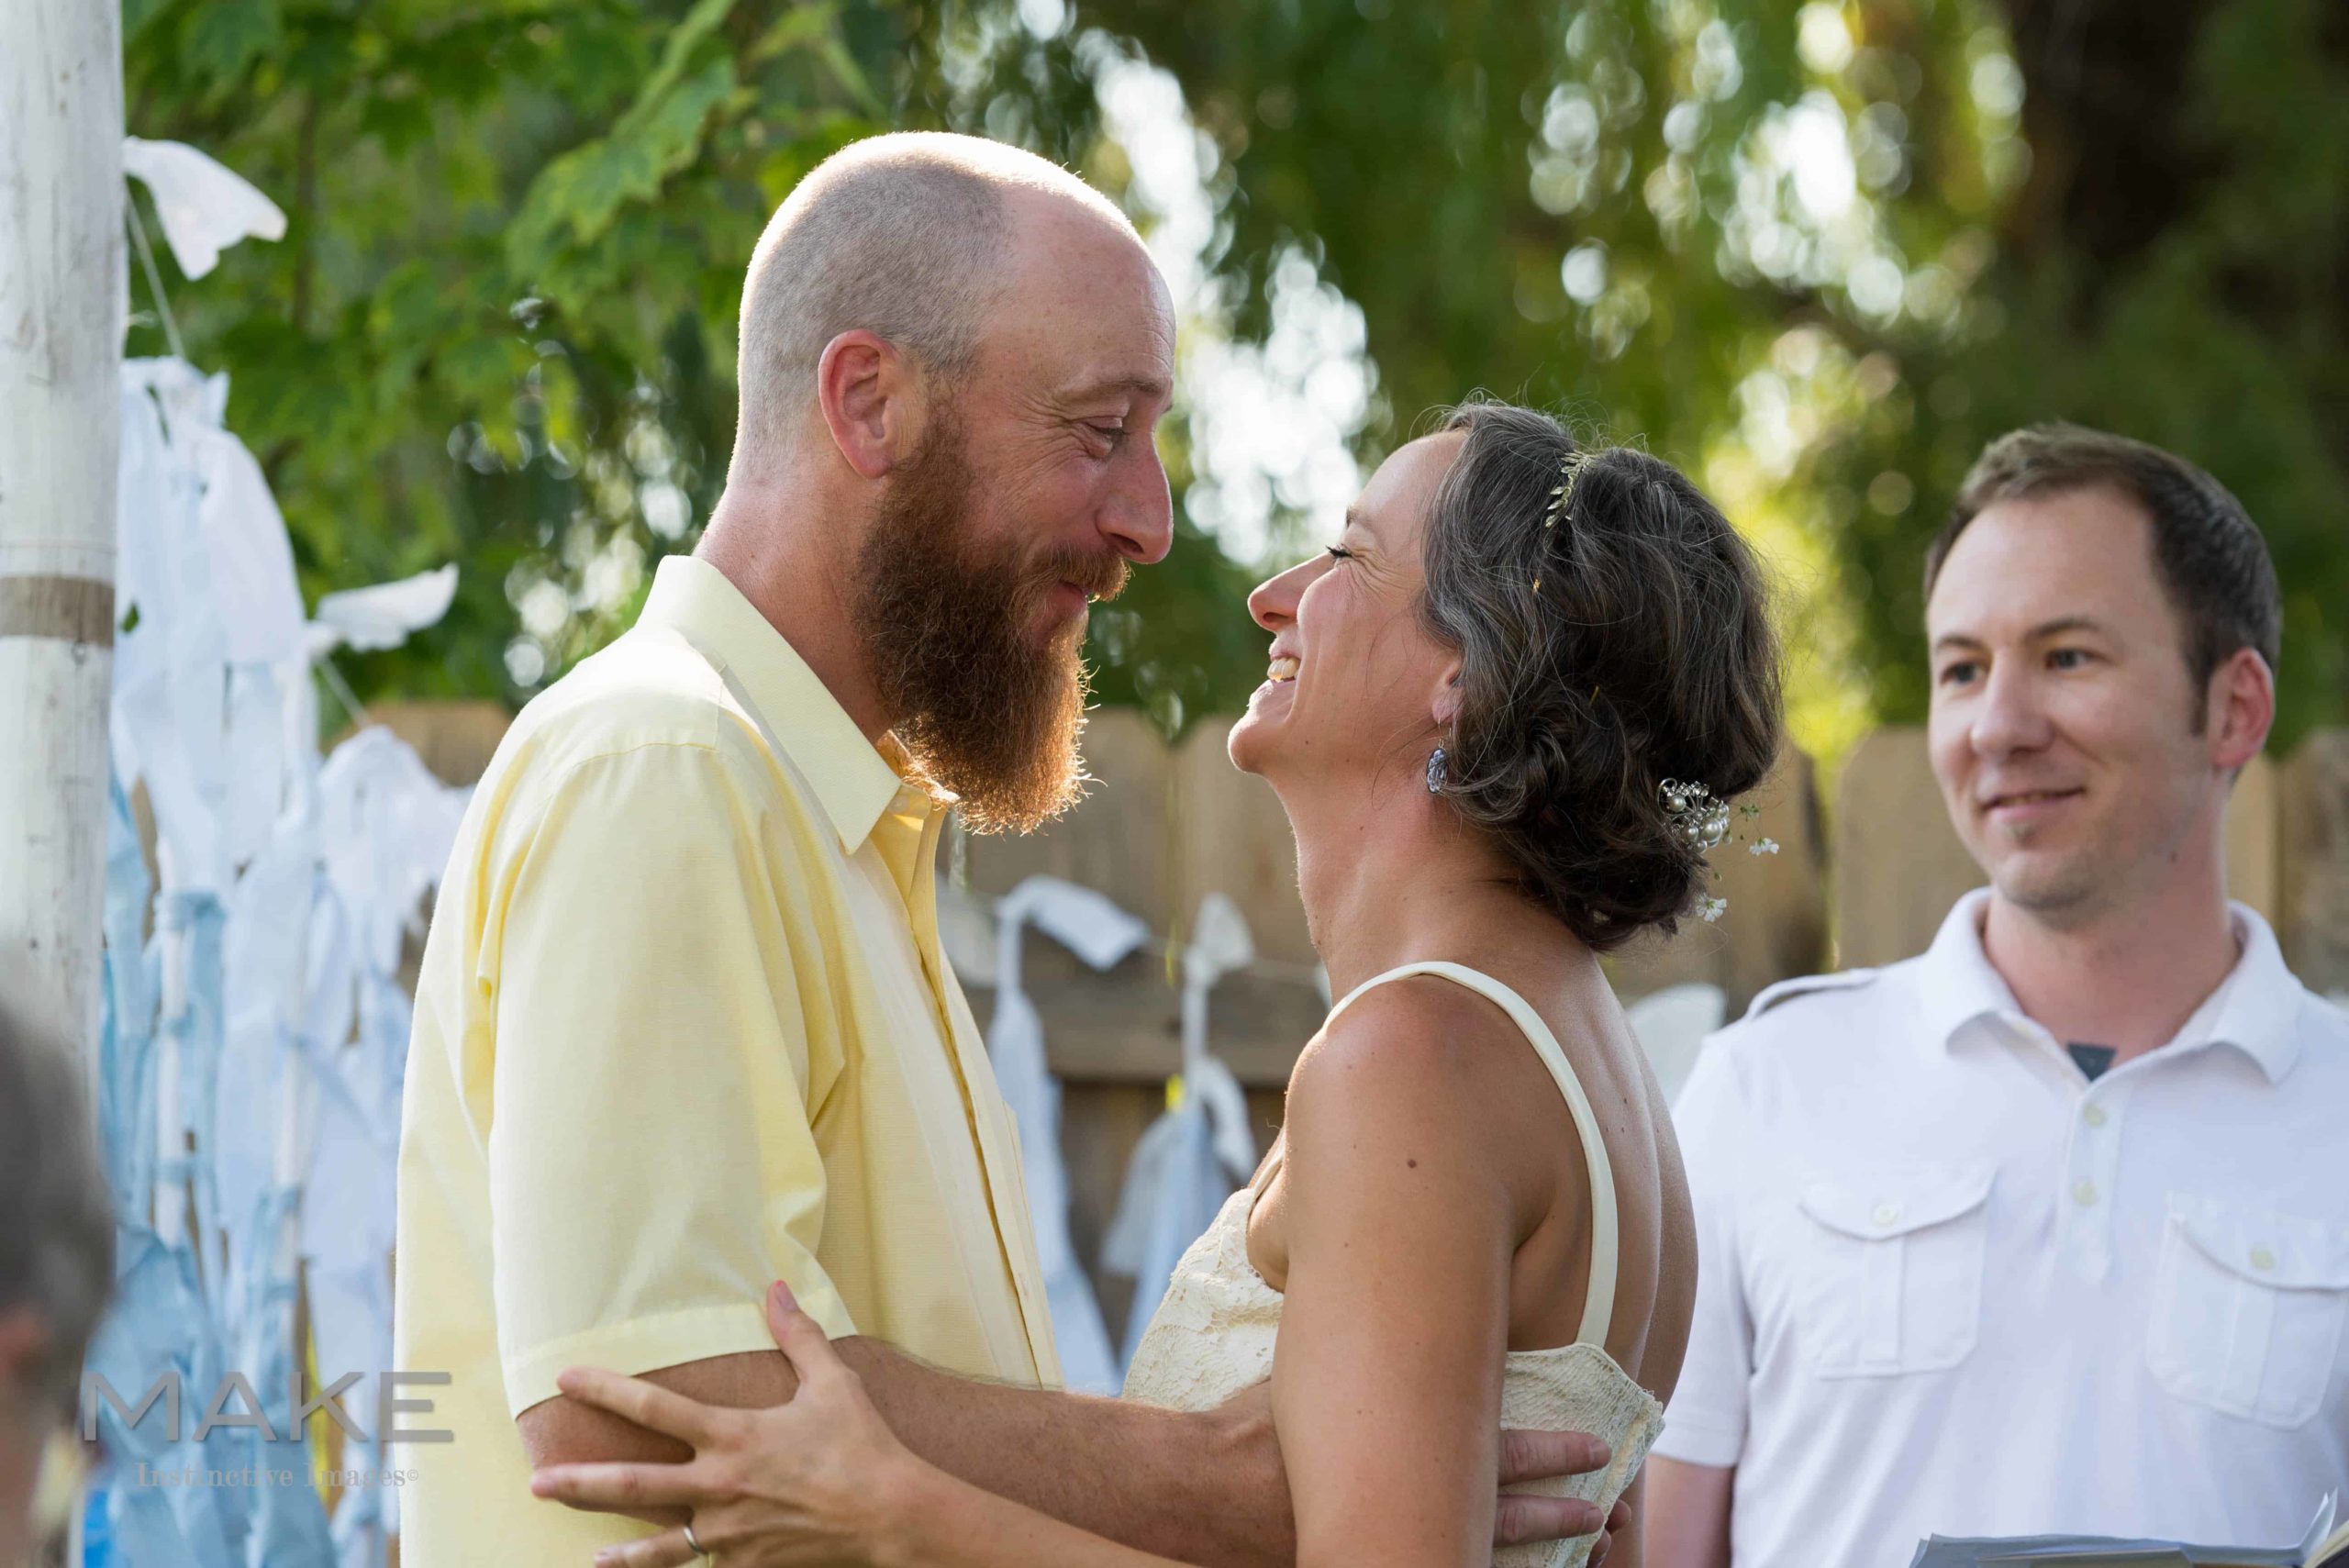 during a backyard wedding a couple faces one another, smiling.